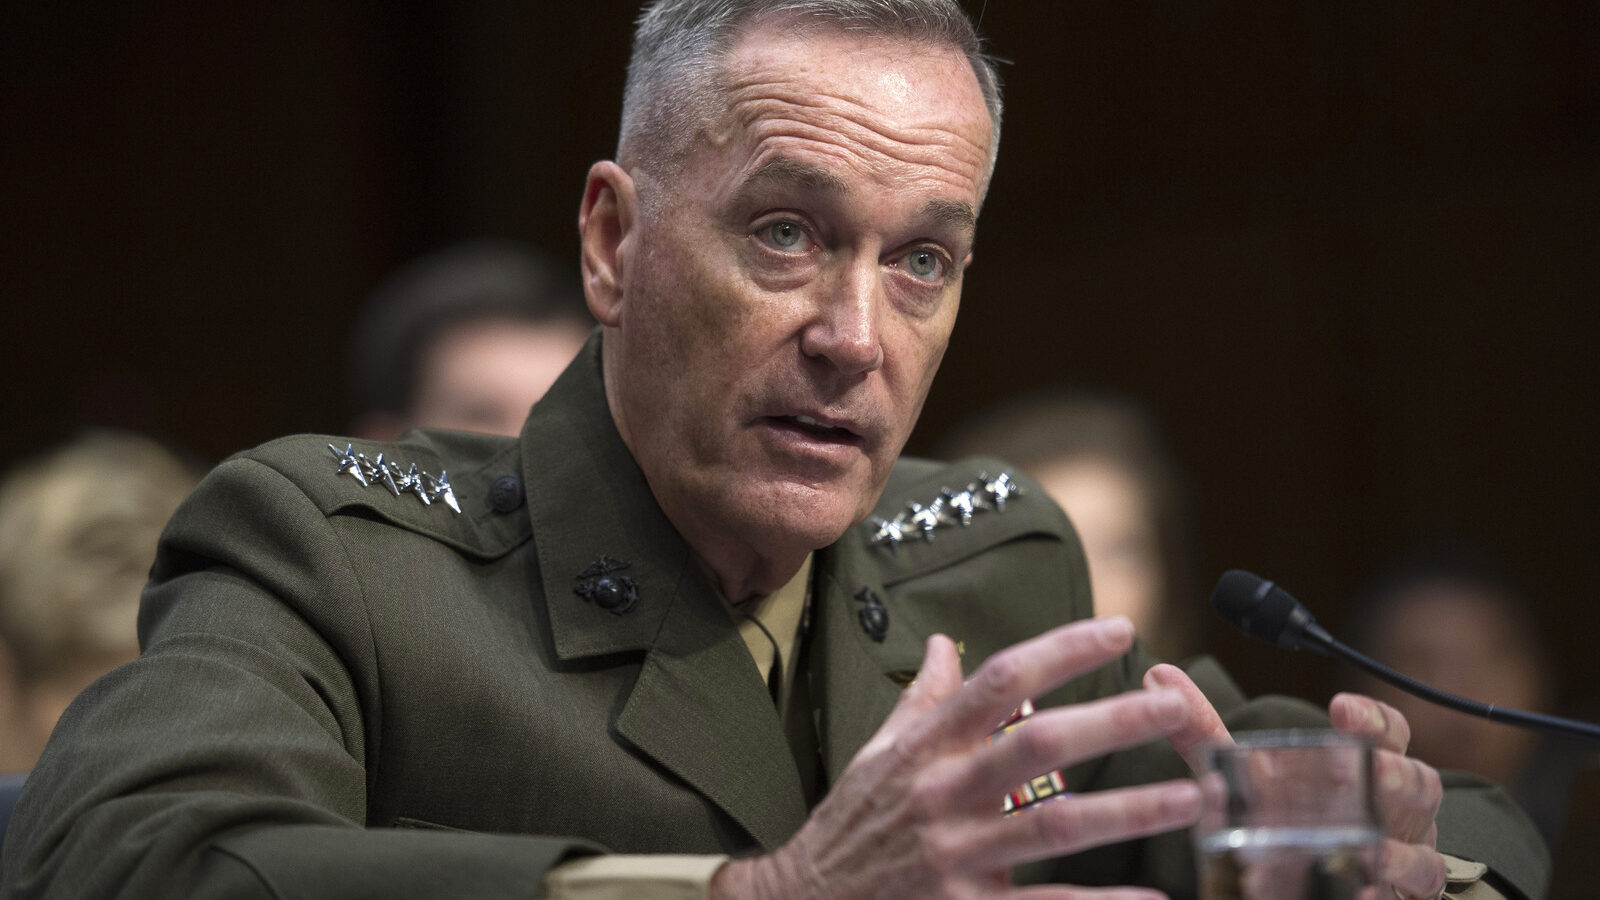 The chairman of the Joint Chiefs of Staff Gen. Joe Dunford has pushing for counter-ISIS offensive in Libya, now it's looks Obama may be taking Dunford's recommendations seriously. (AP Photo)